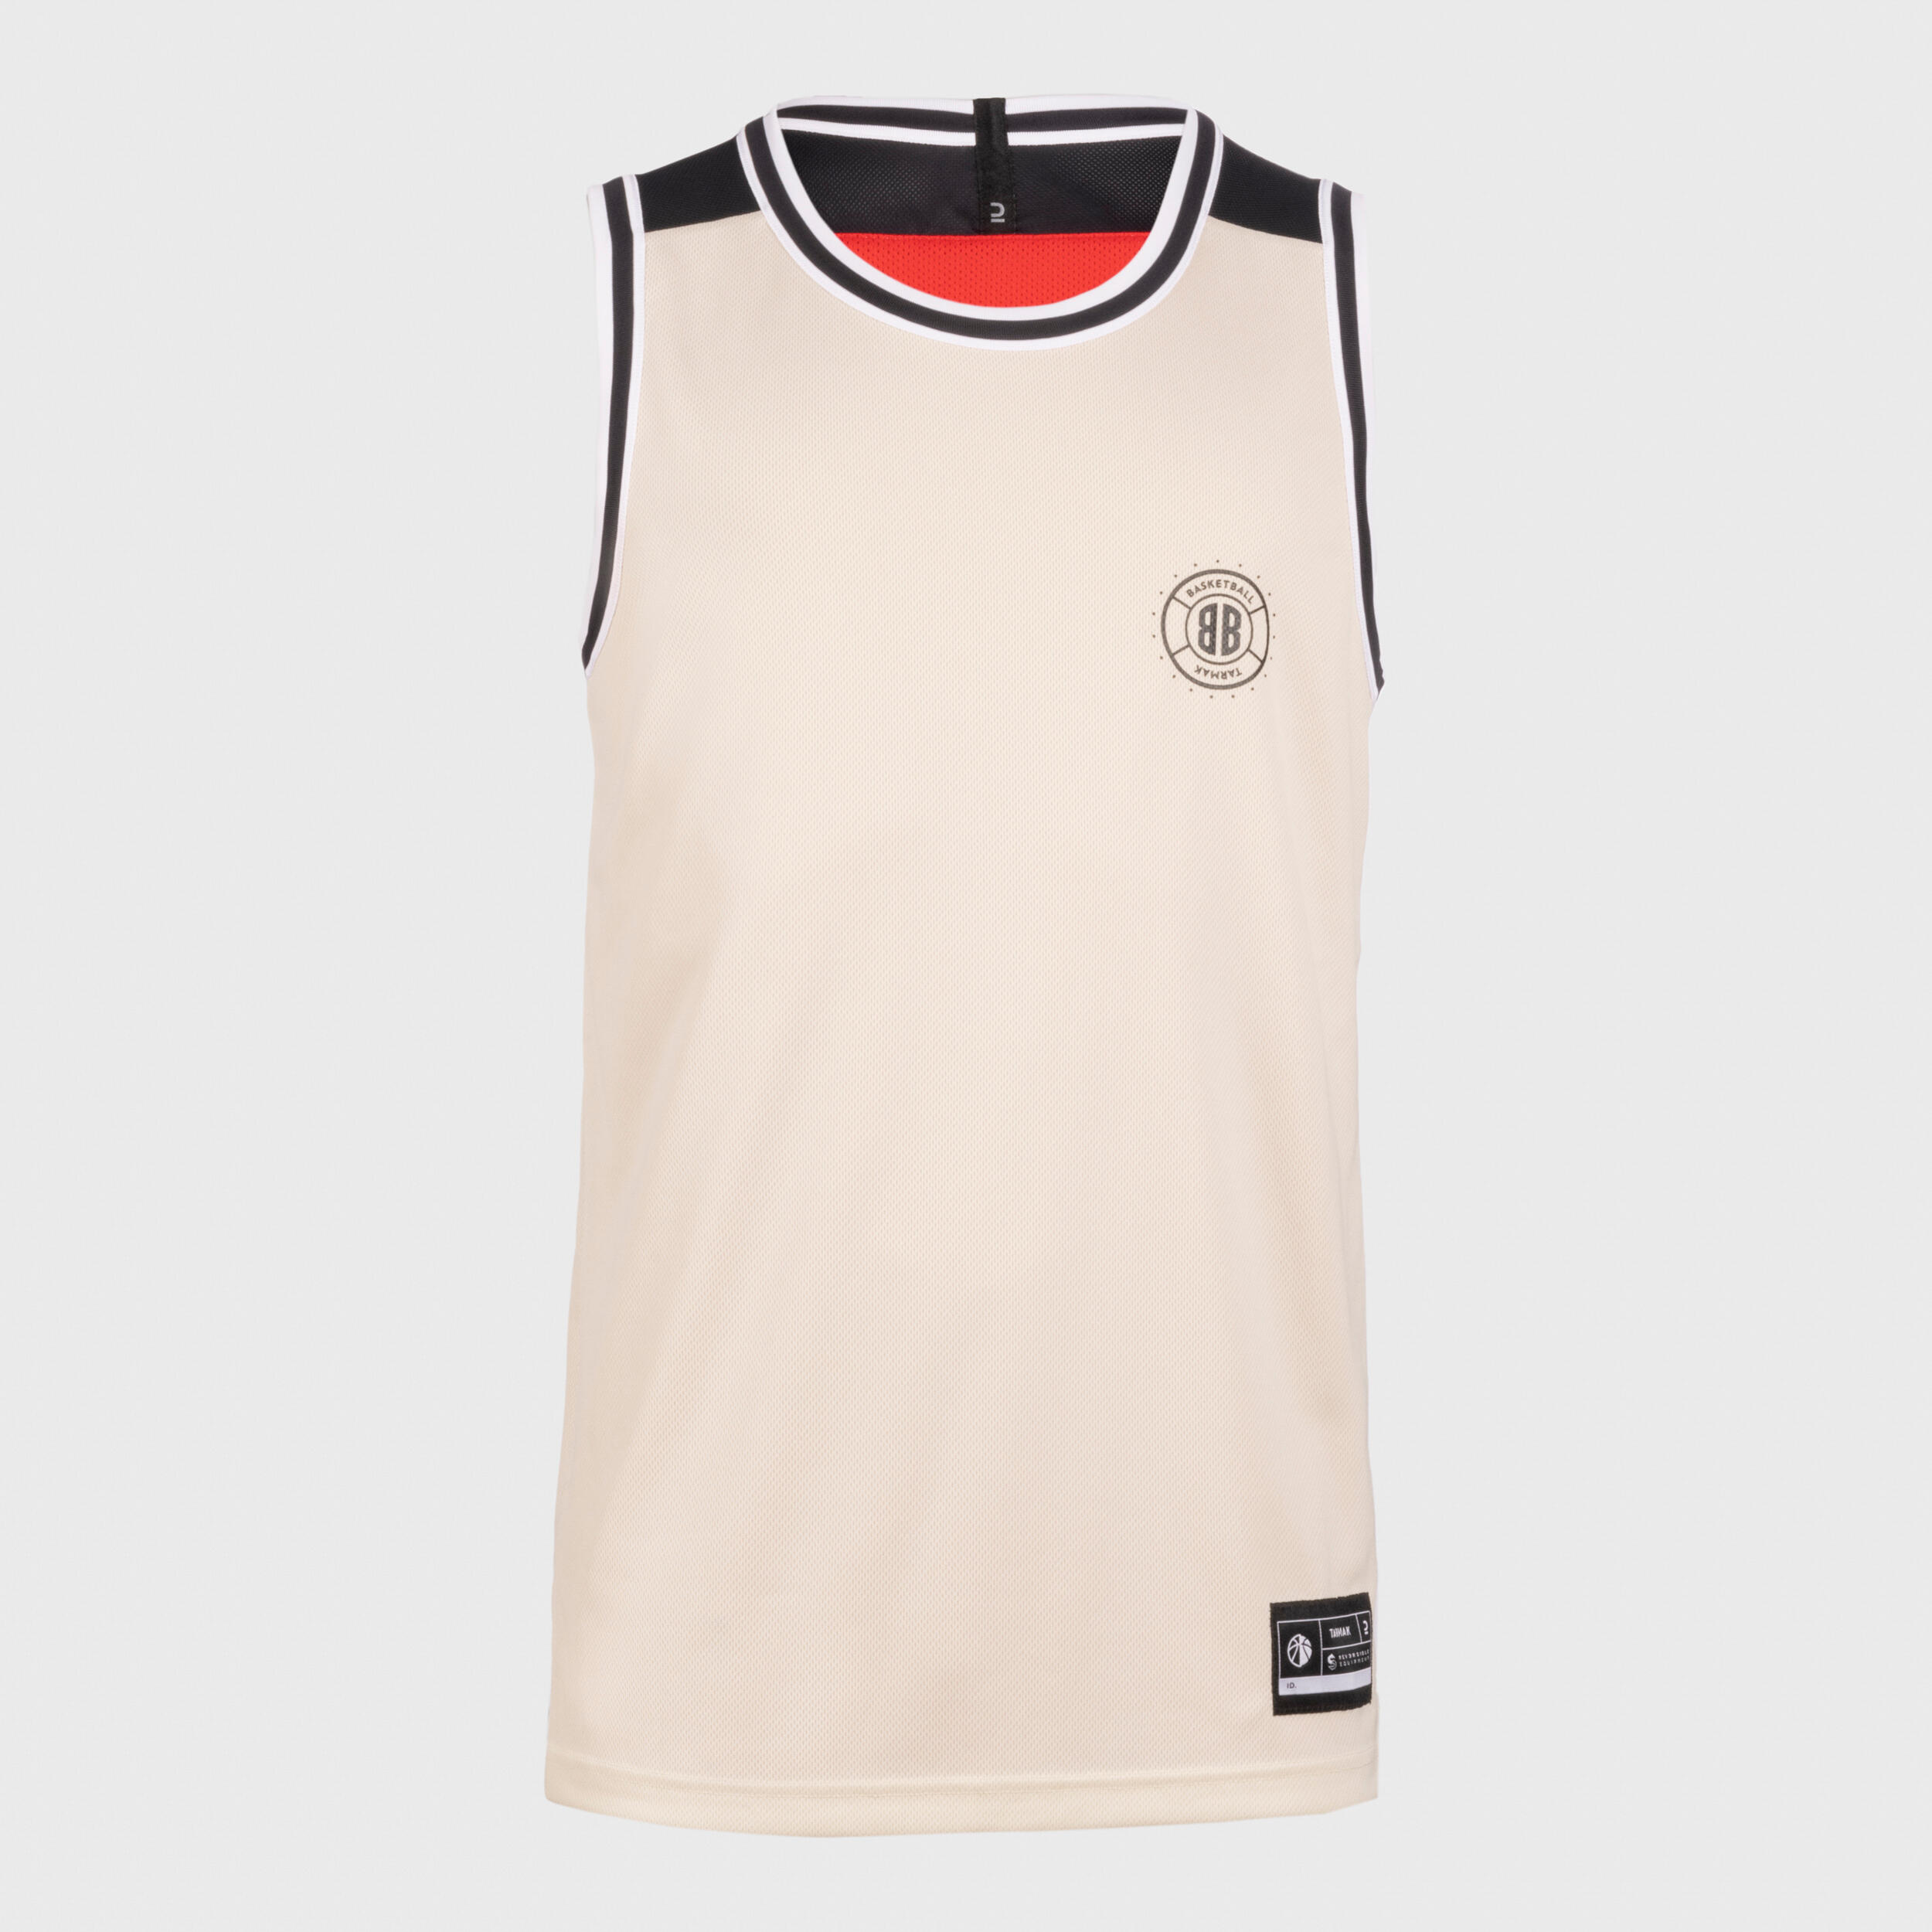 Adult 2-Way Sleeveless Basketball Jersey T500 - Red/Beige 5/9